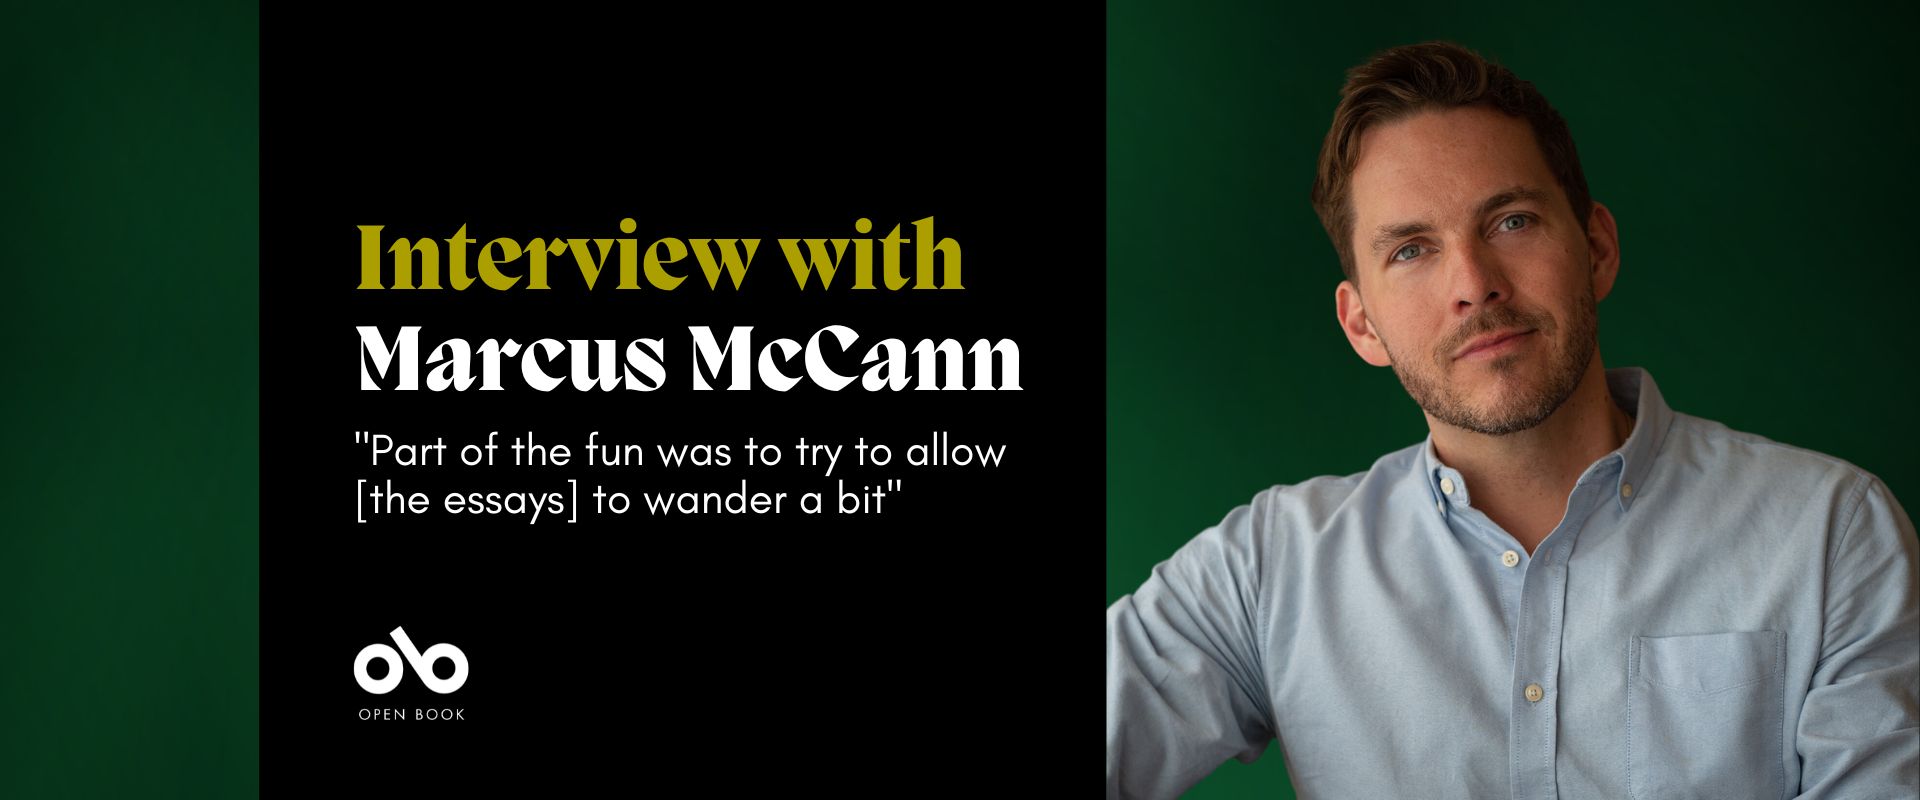 Black and green banner with photo of writer Marcus McCann and text reading "Interview with Marcus McCann" and "Part of the fun was allowing [the essays] to wander a bit". Open Book logo bottom left